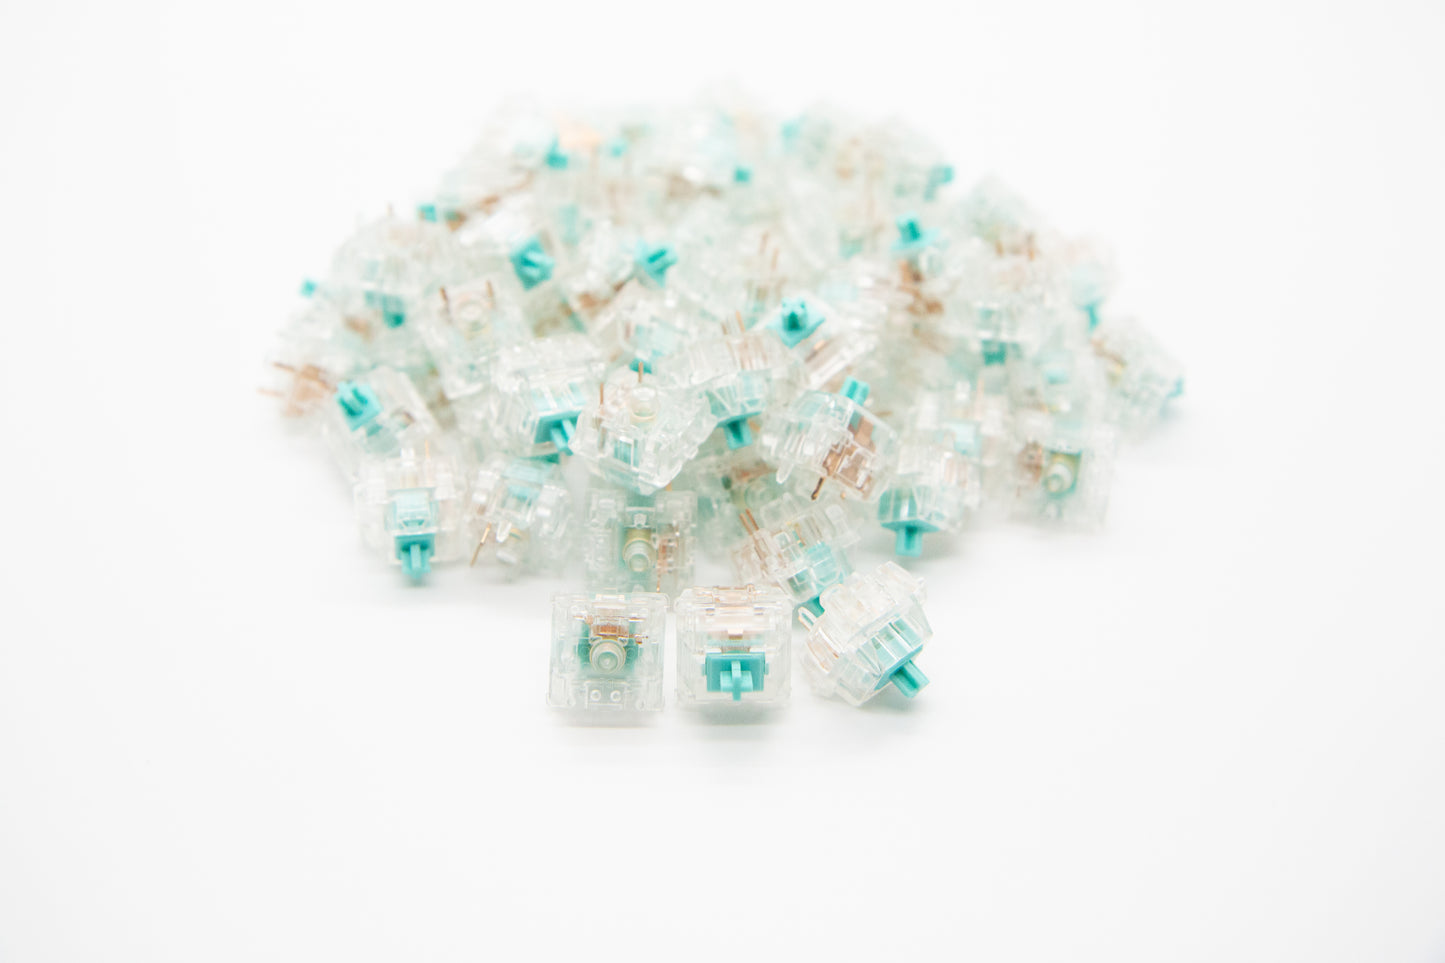 Close-up shot of a pile of ZealPC Tealios V2 - 67g mechanical keyboard switches featuring transparent housing and teal stems